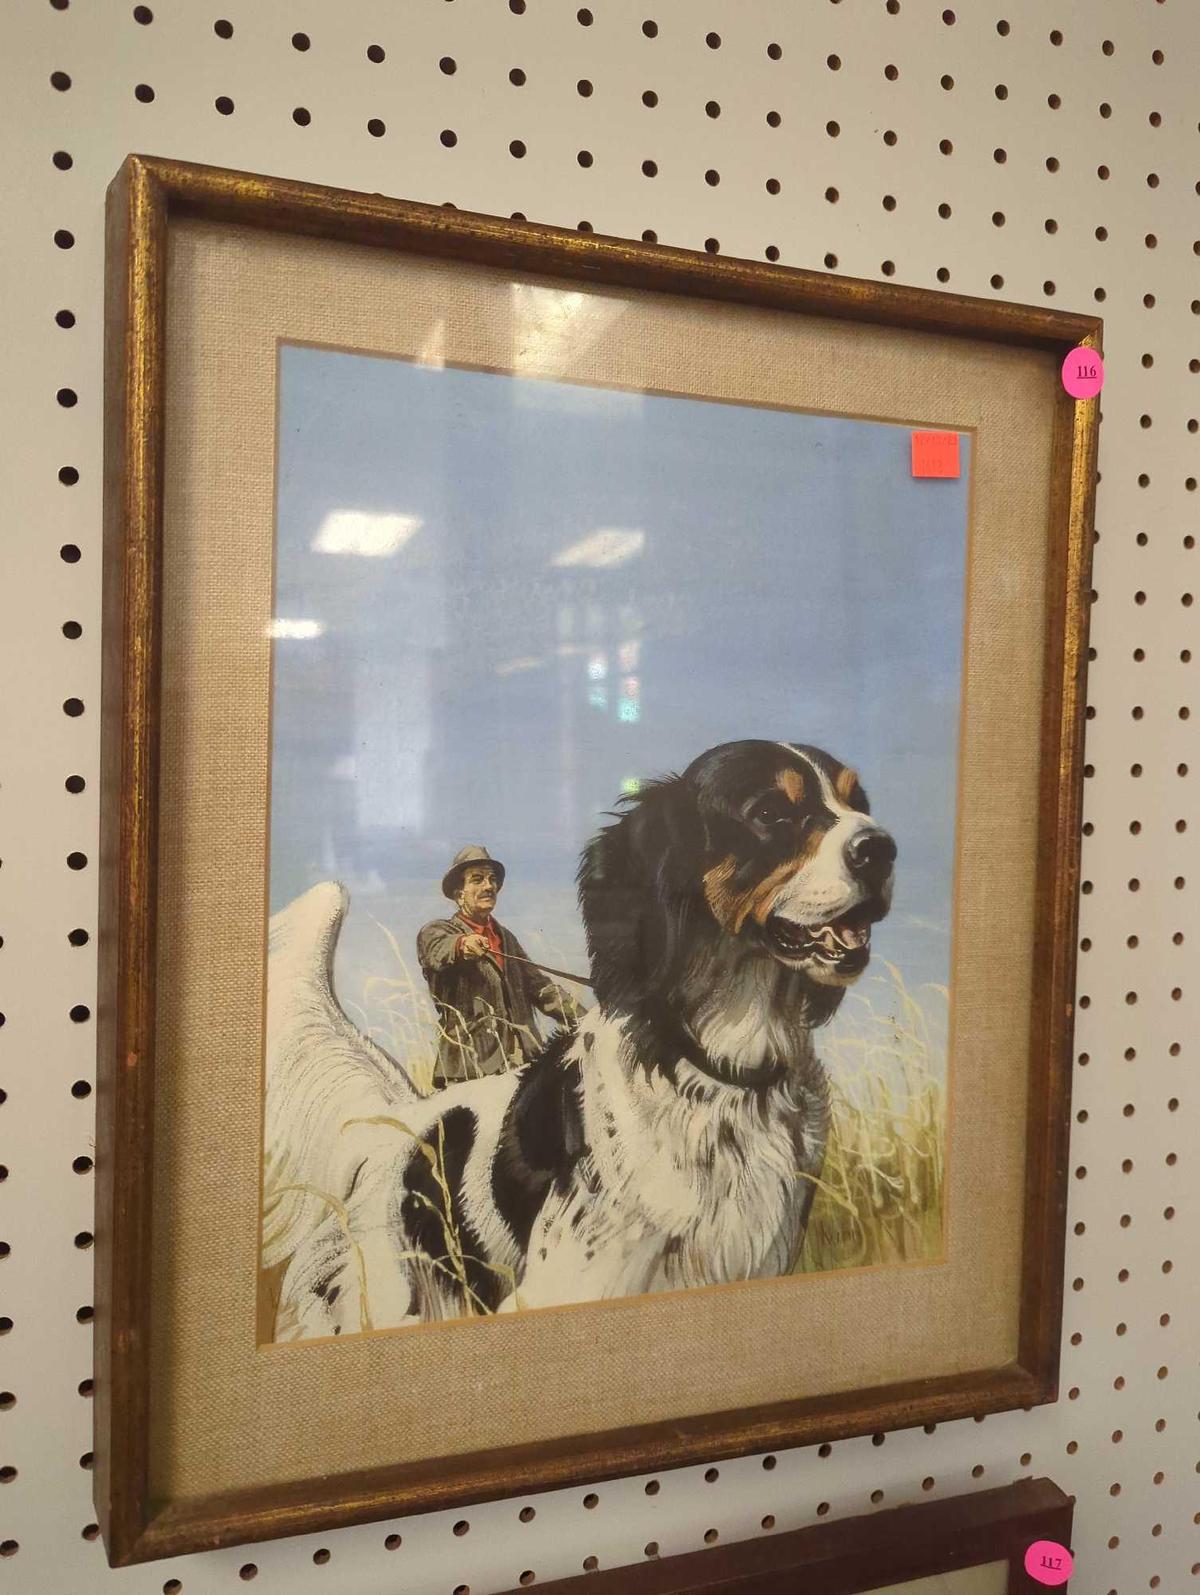 FRAMED IT MATTED PRINCE, MAN WITH HUNTING DOG, 13 1/2"X 17"W